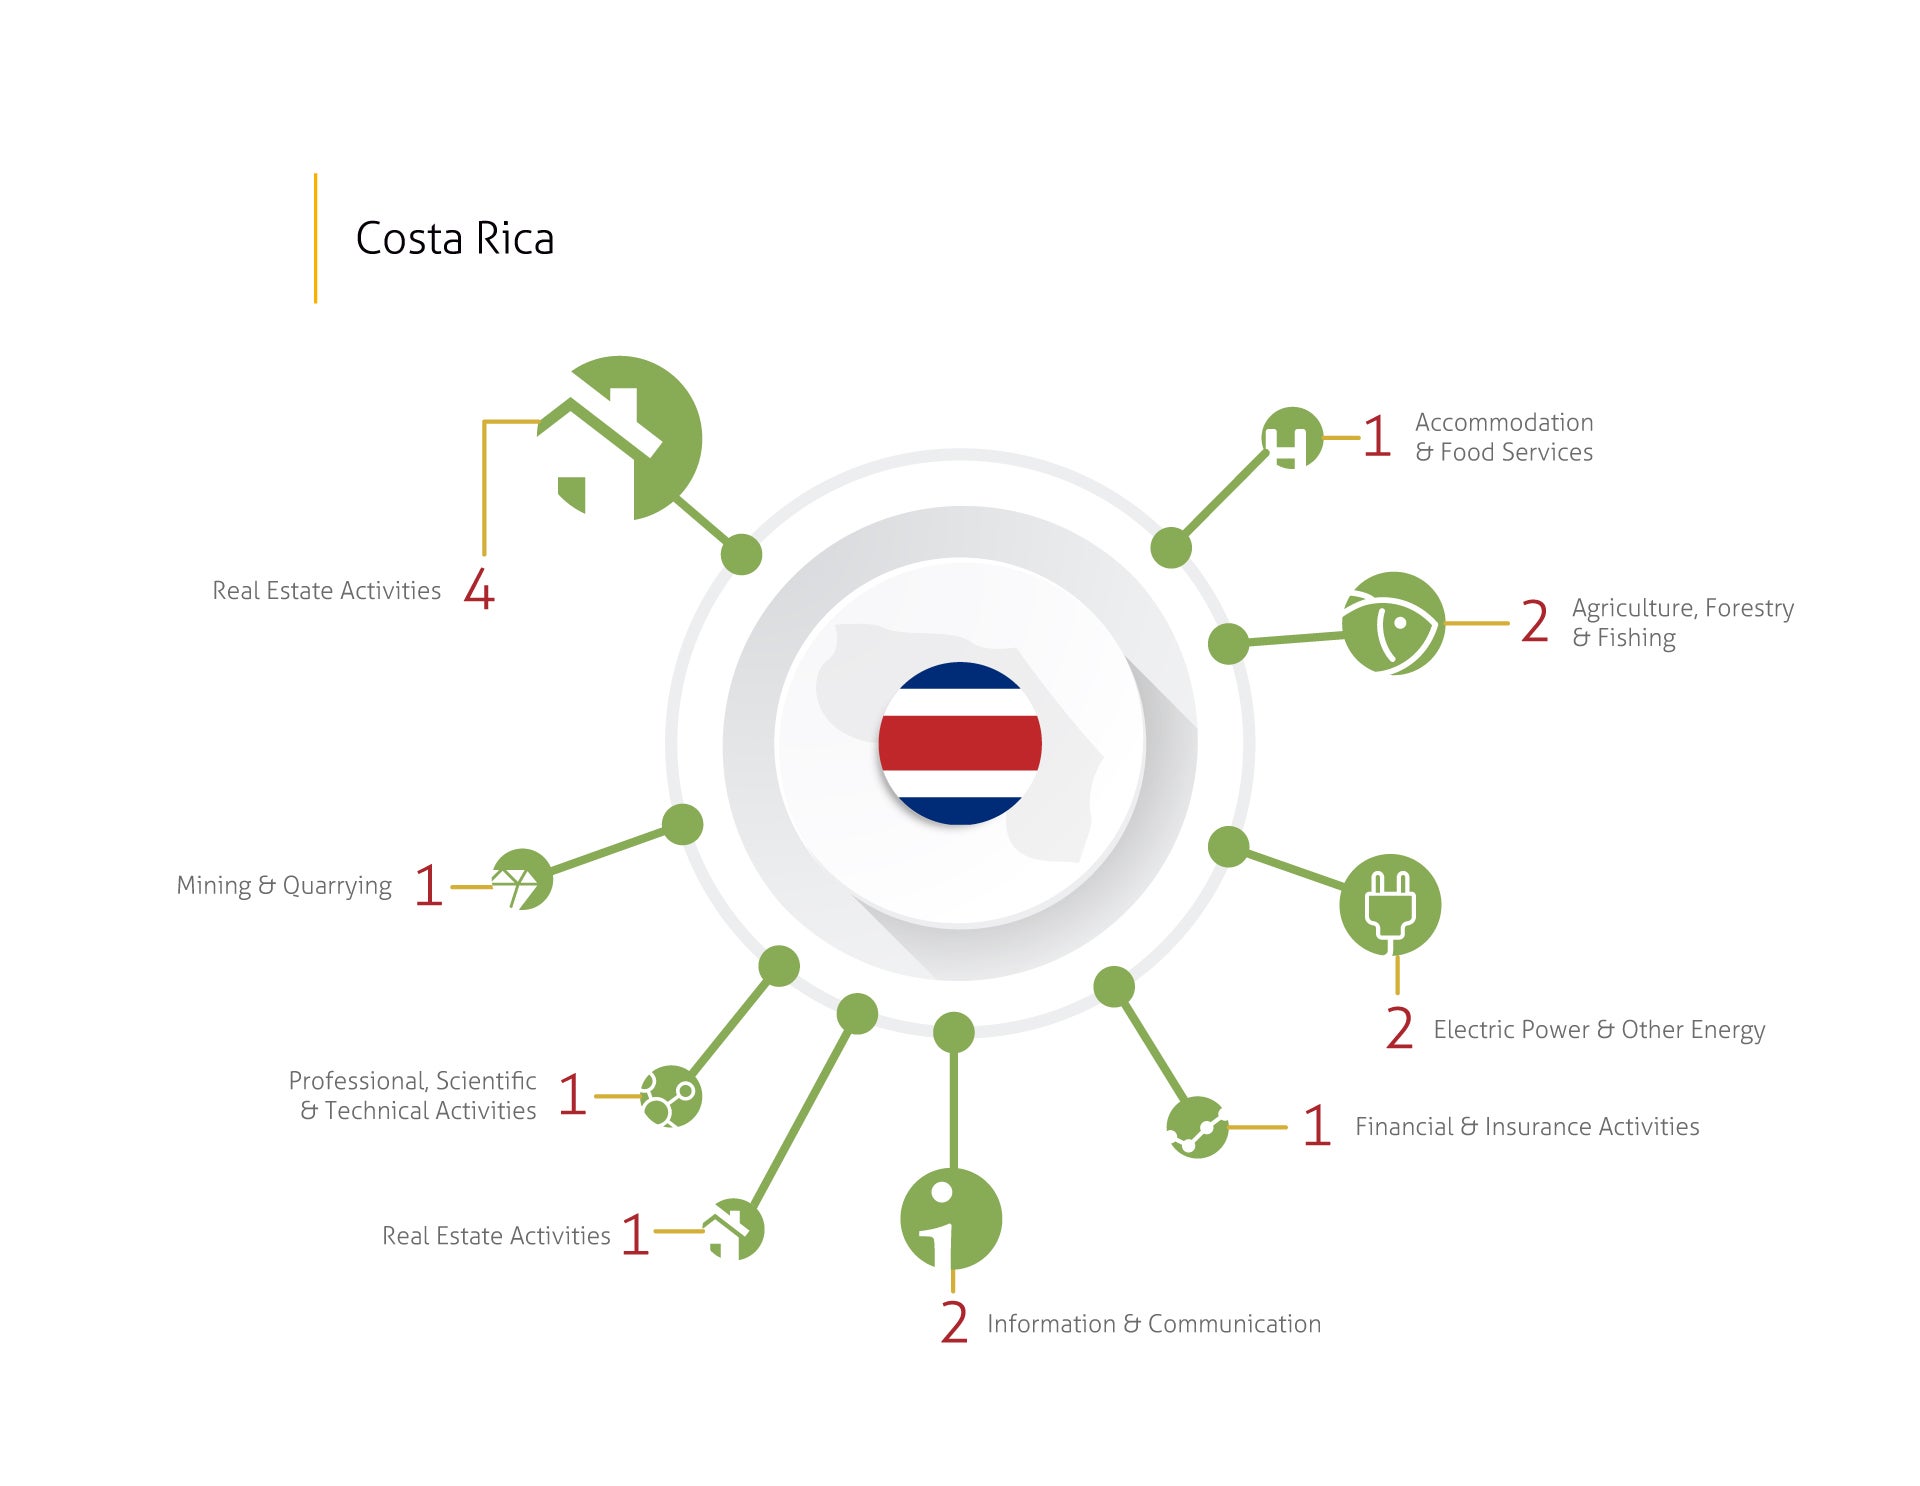 Industries involved in disputes - Costa Rica